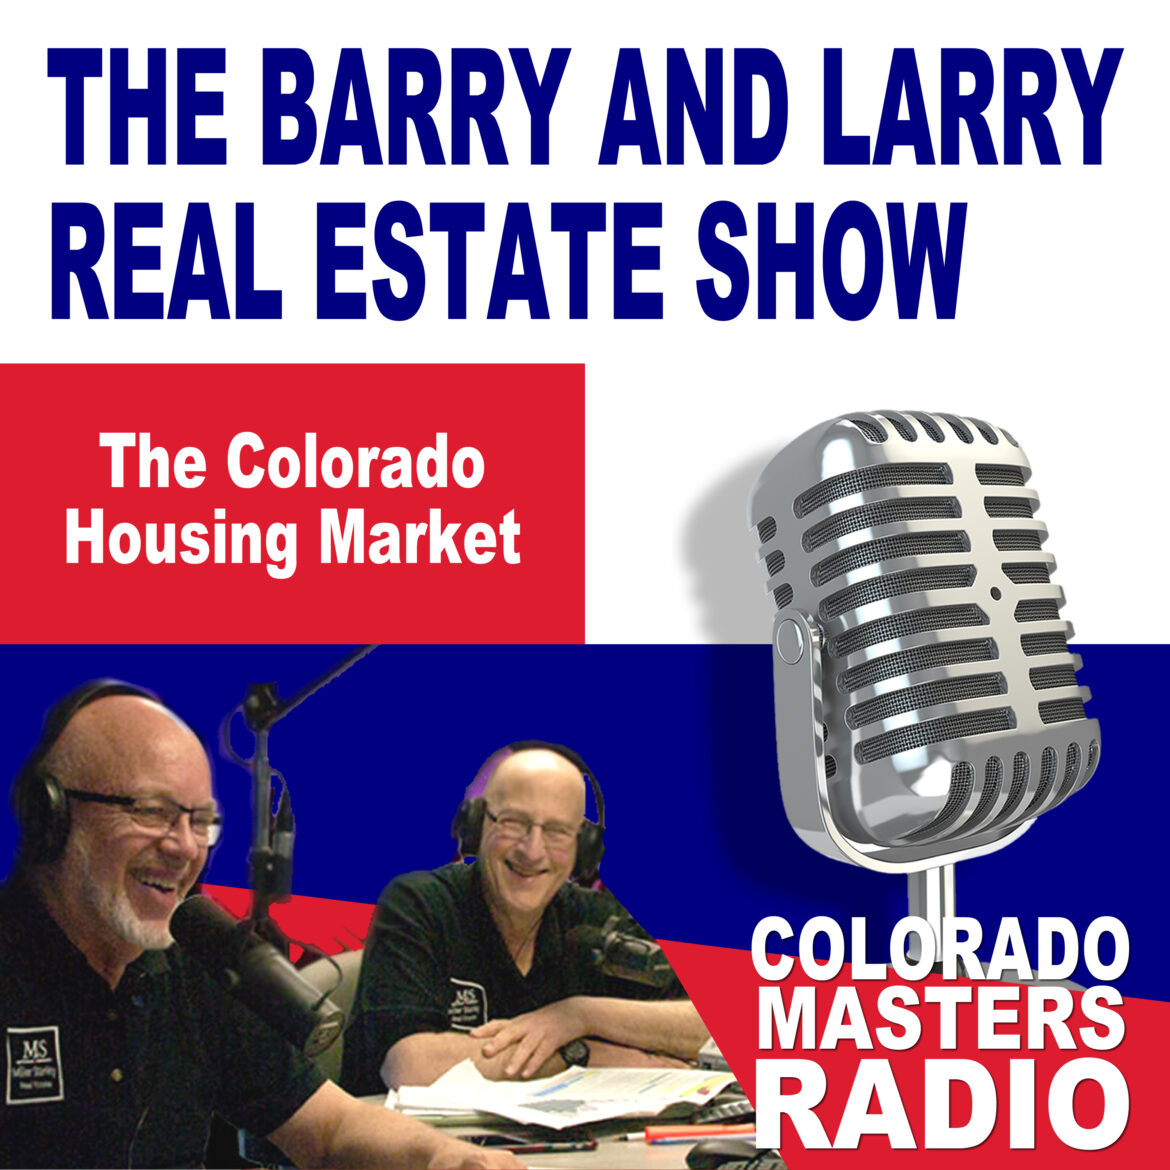 The Larry and Barry Real Estate Show - The Colorado Housing Market